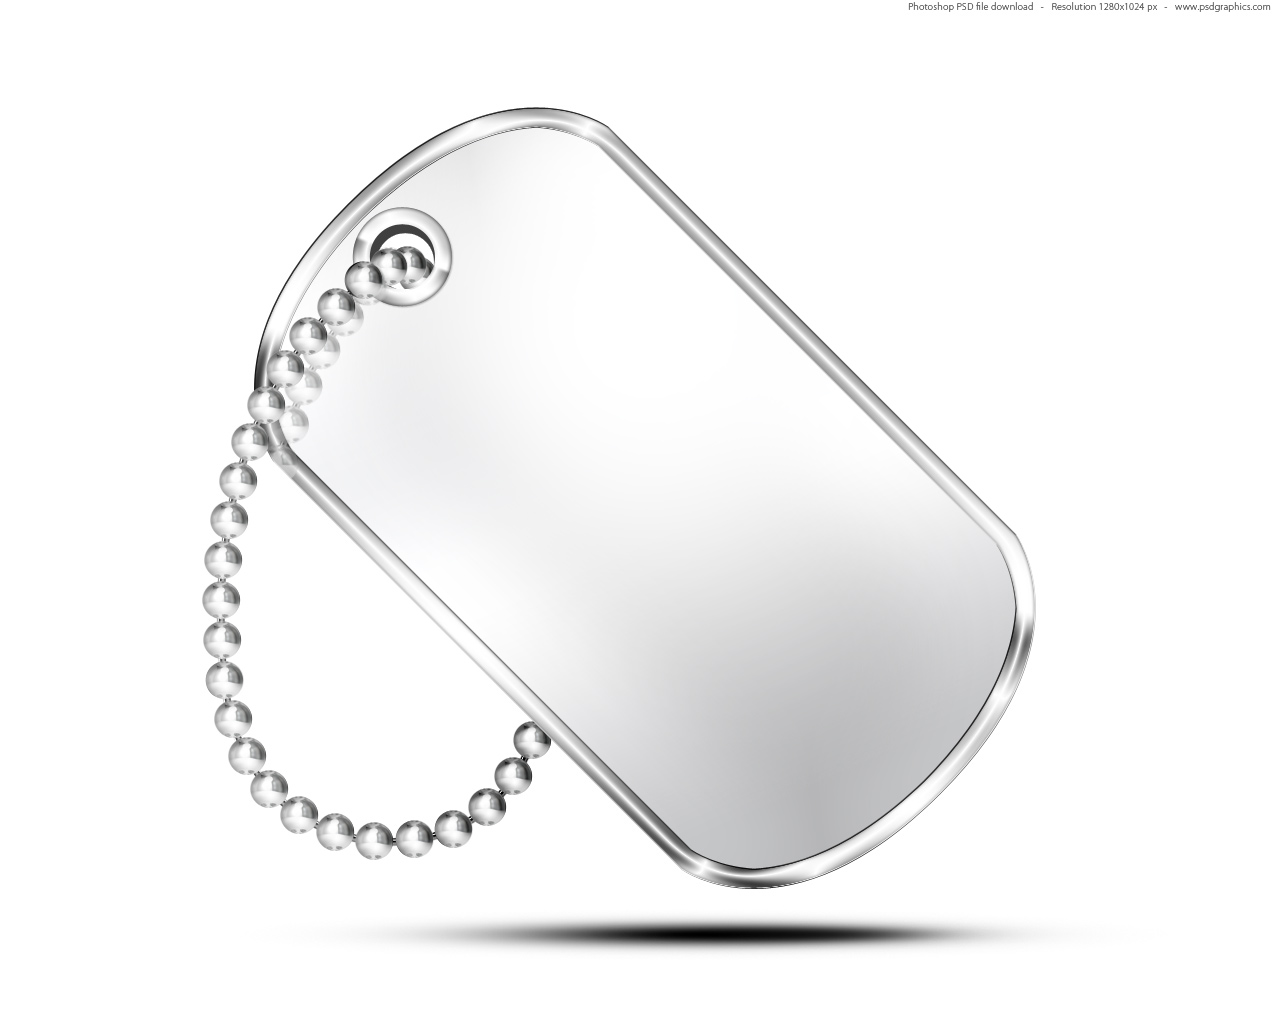 Military Dog Tag Template Free